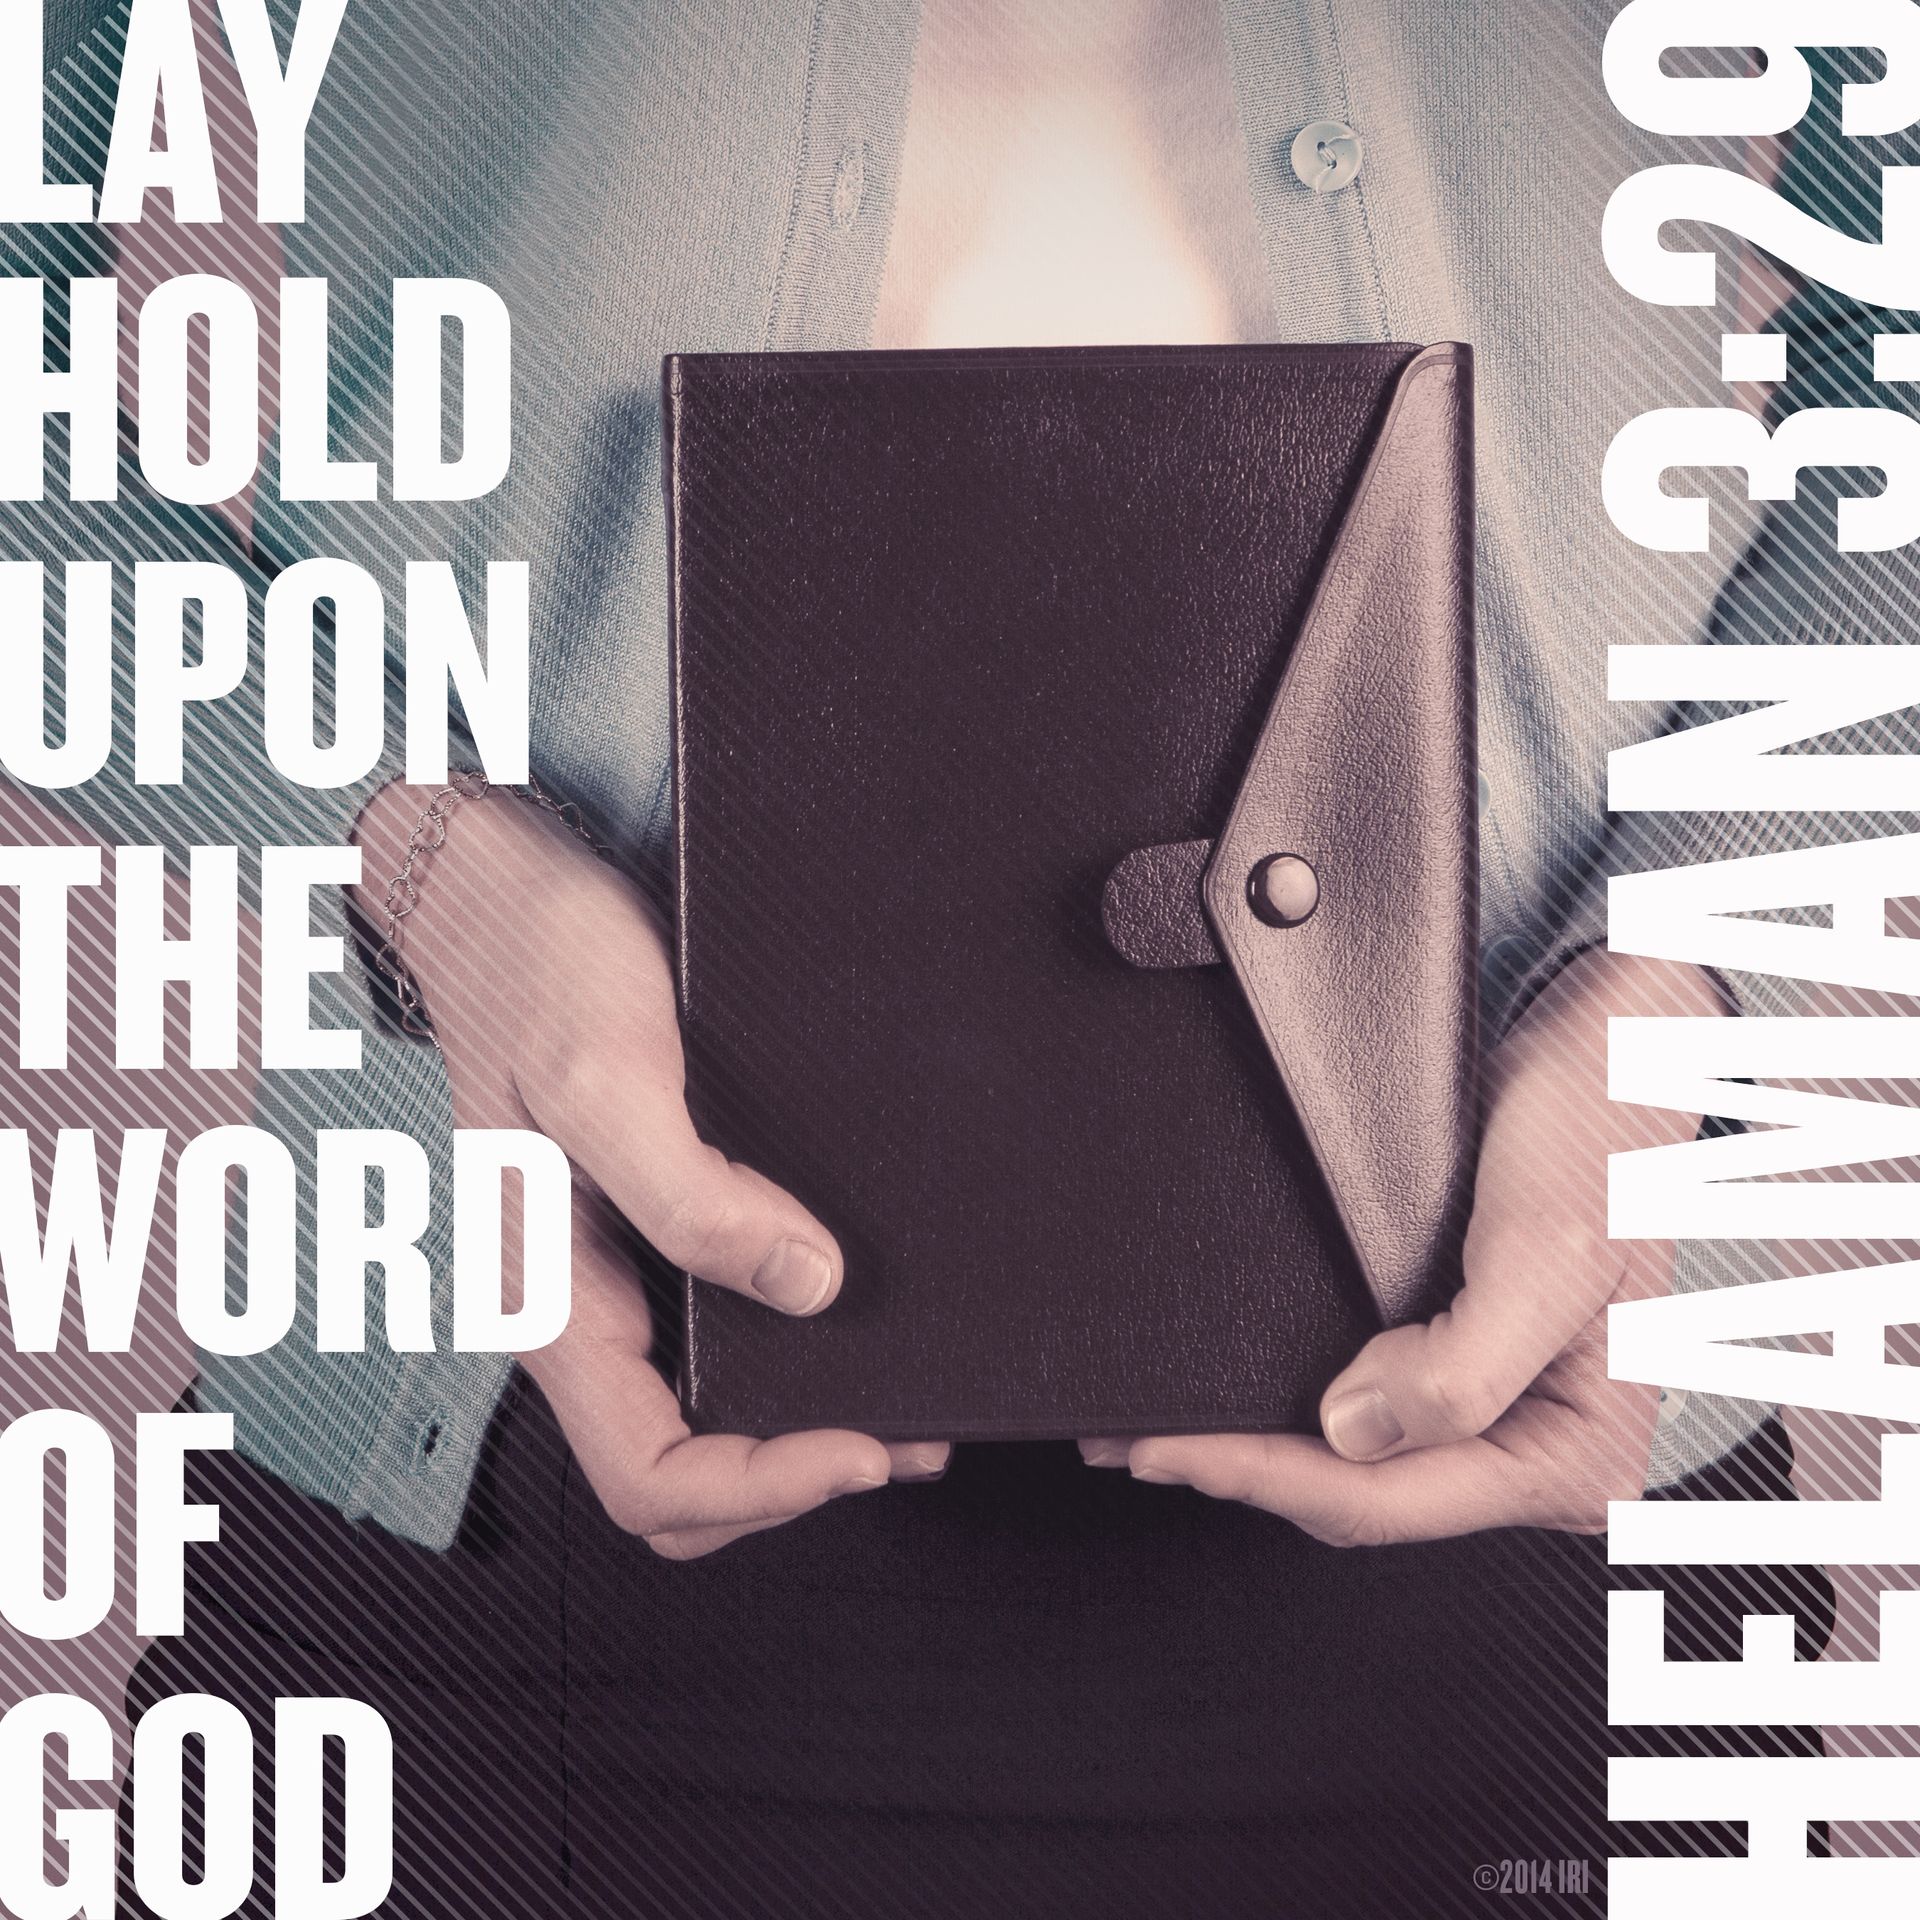 “Lay hold upon the word of God.”—Helaman 3:29